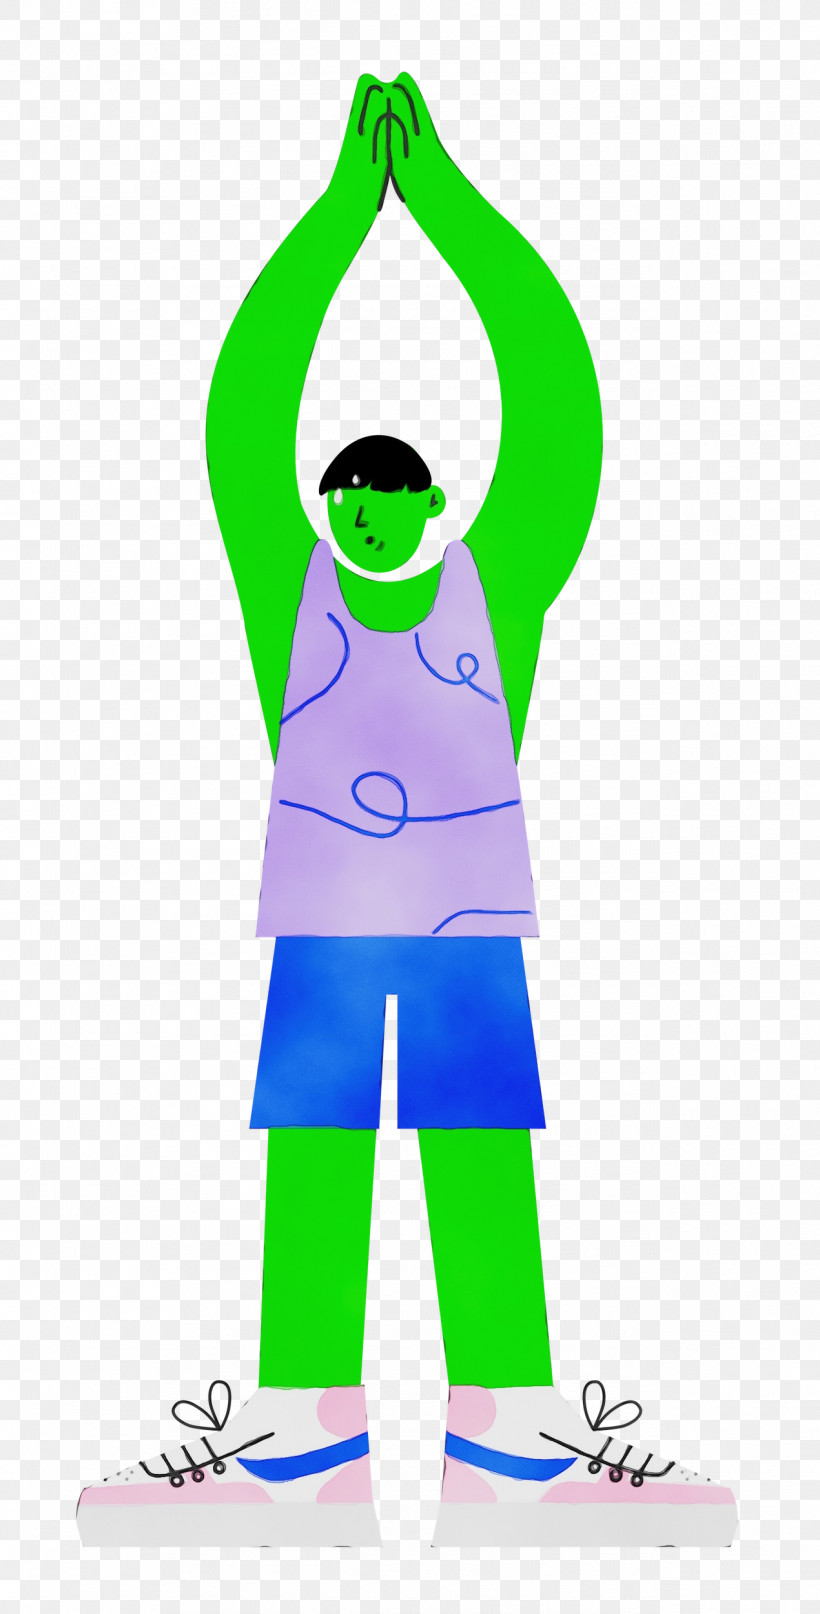 Green Outerwear / M Violet Character Headgear, PNG, 1270x2500px, Sports, Character, Costume, Geometry, Green Download Free